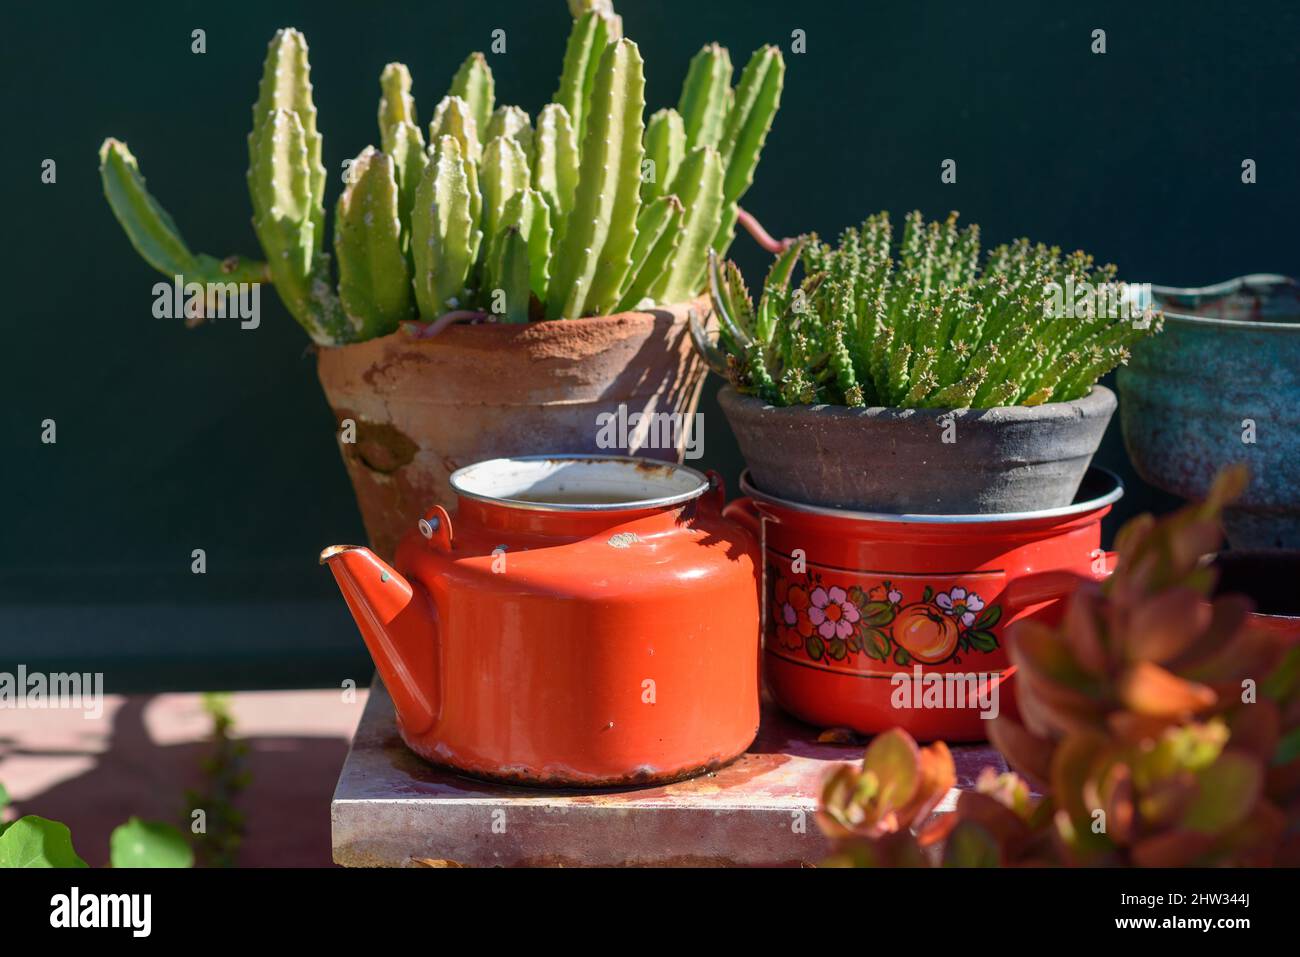 Succulent and cactus. Euphorbia and Stapelia plants Design garden. Recycled garden design and low-waste lifestyle. Stock Photo